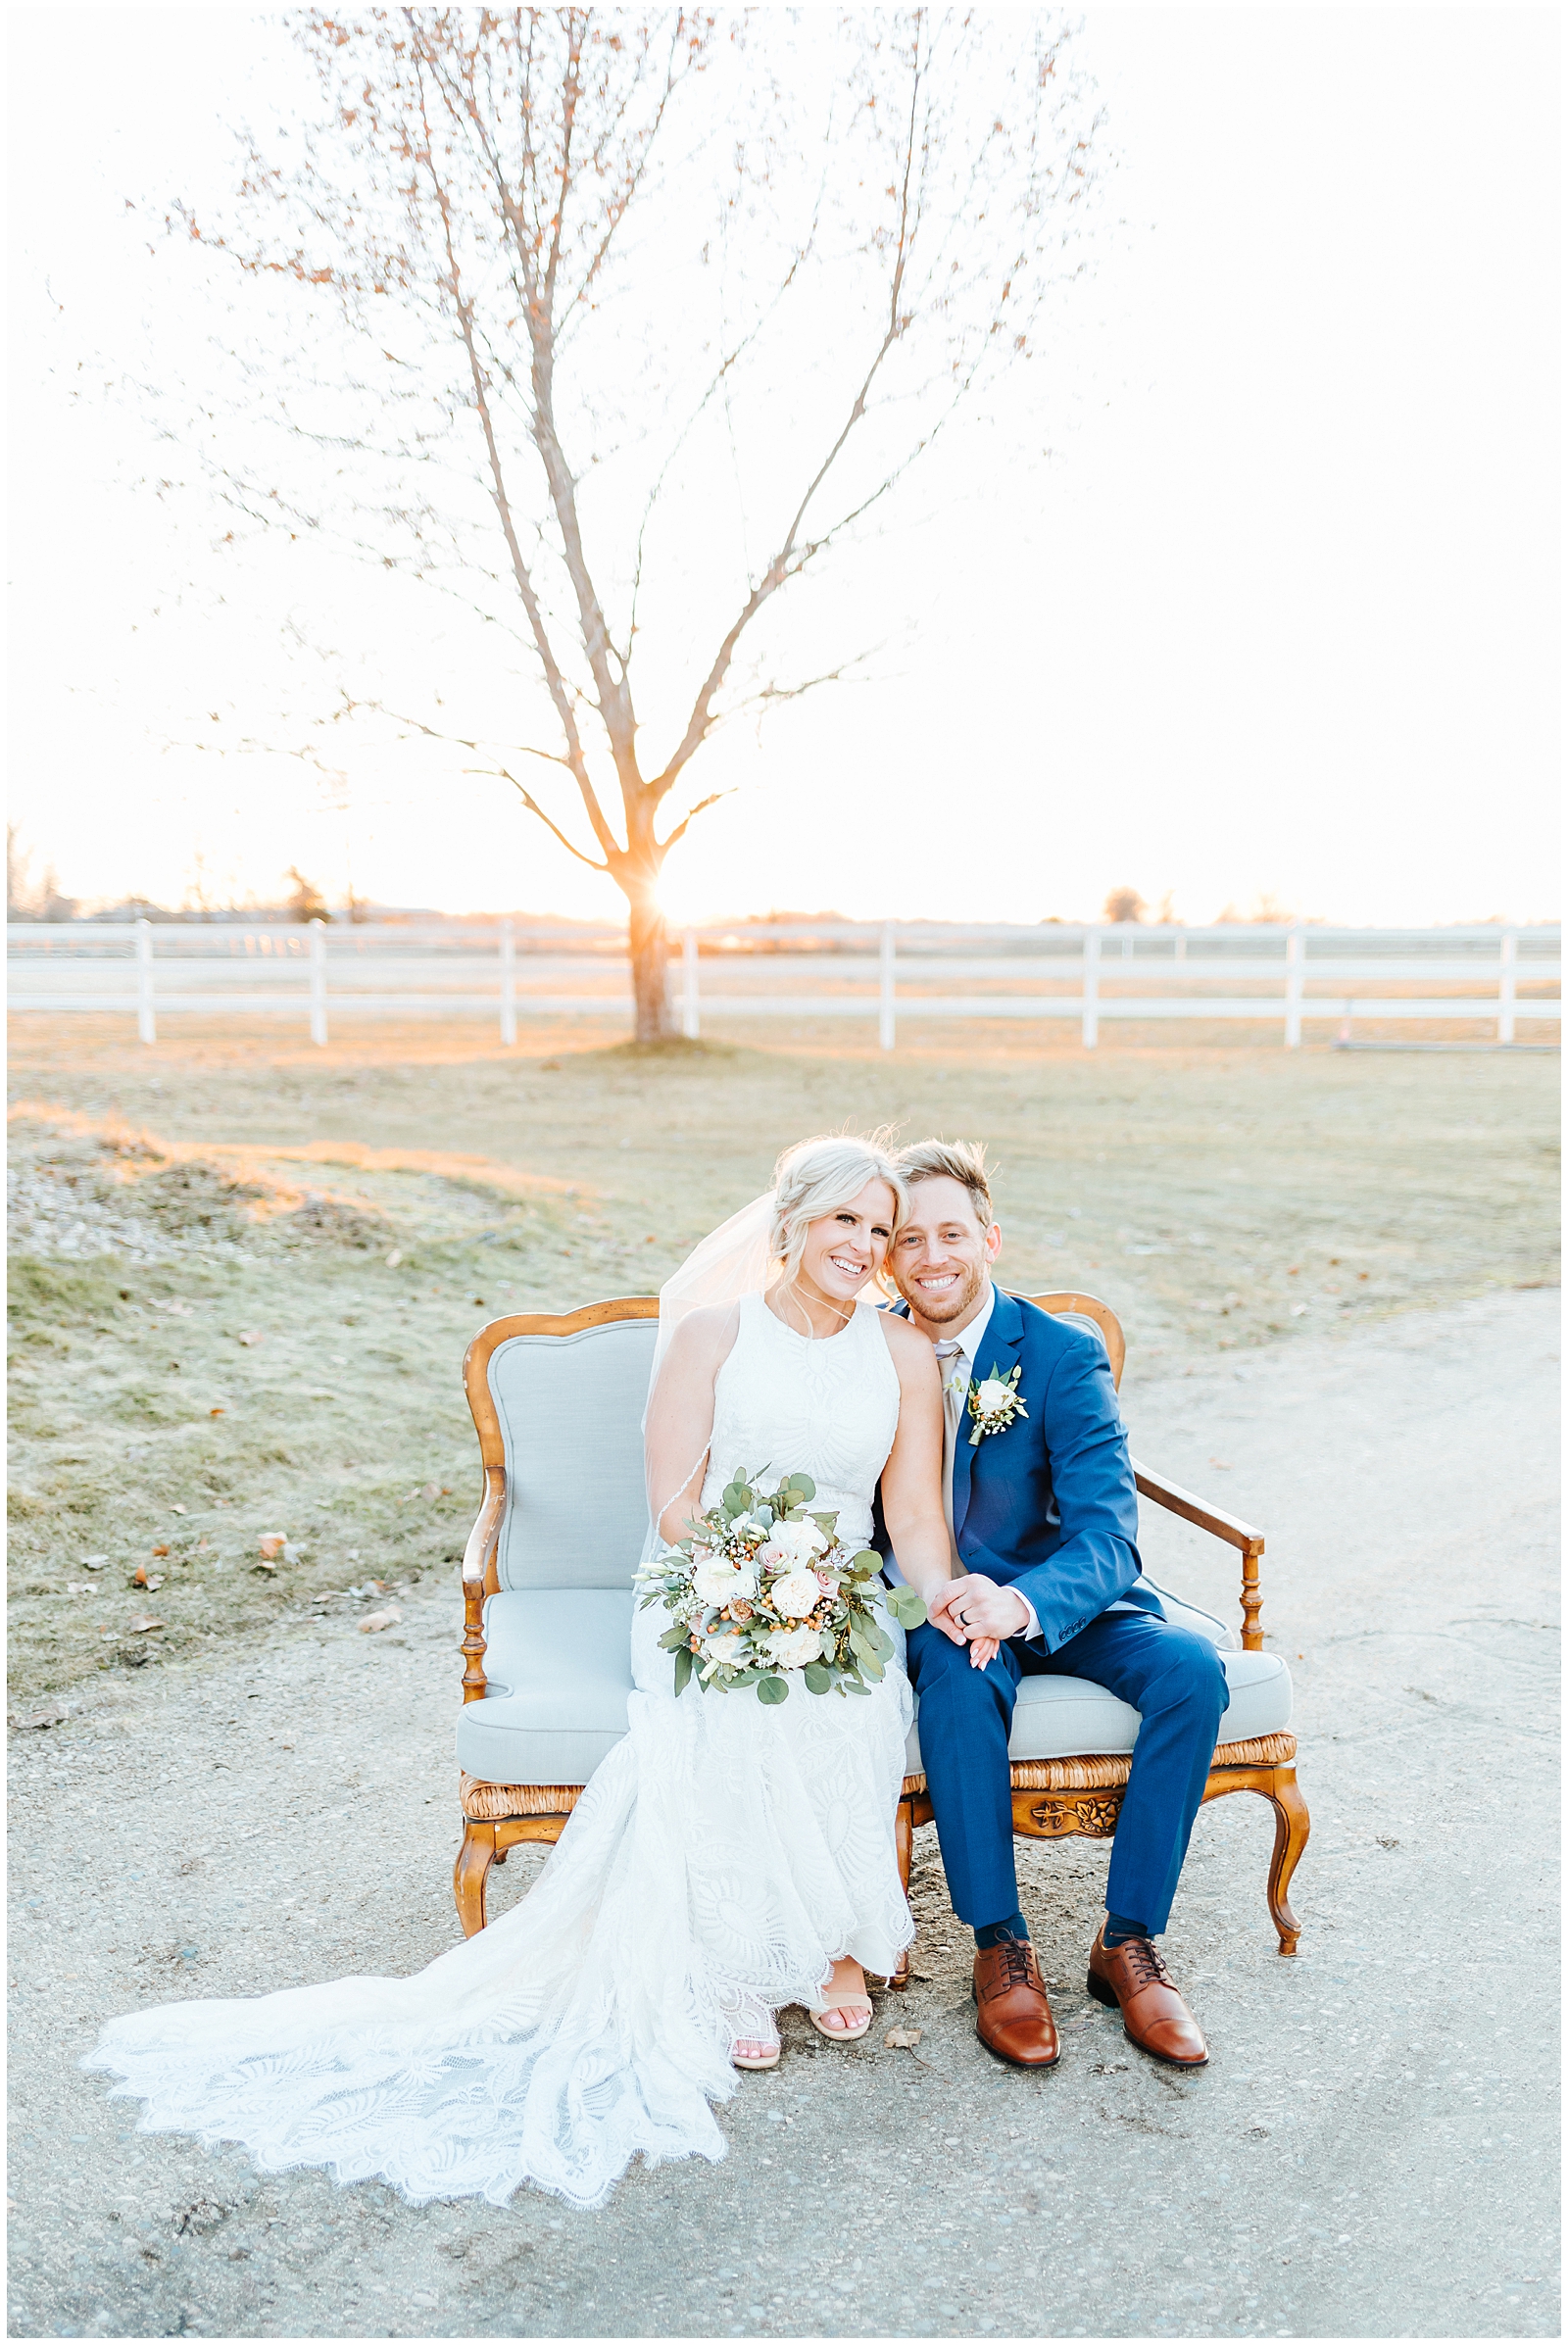 Husband and Wife Golden Hour Portraits at Heartfelt Idaho Spring Elopement with Vintage Settee